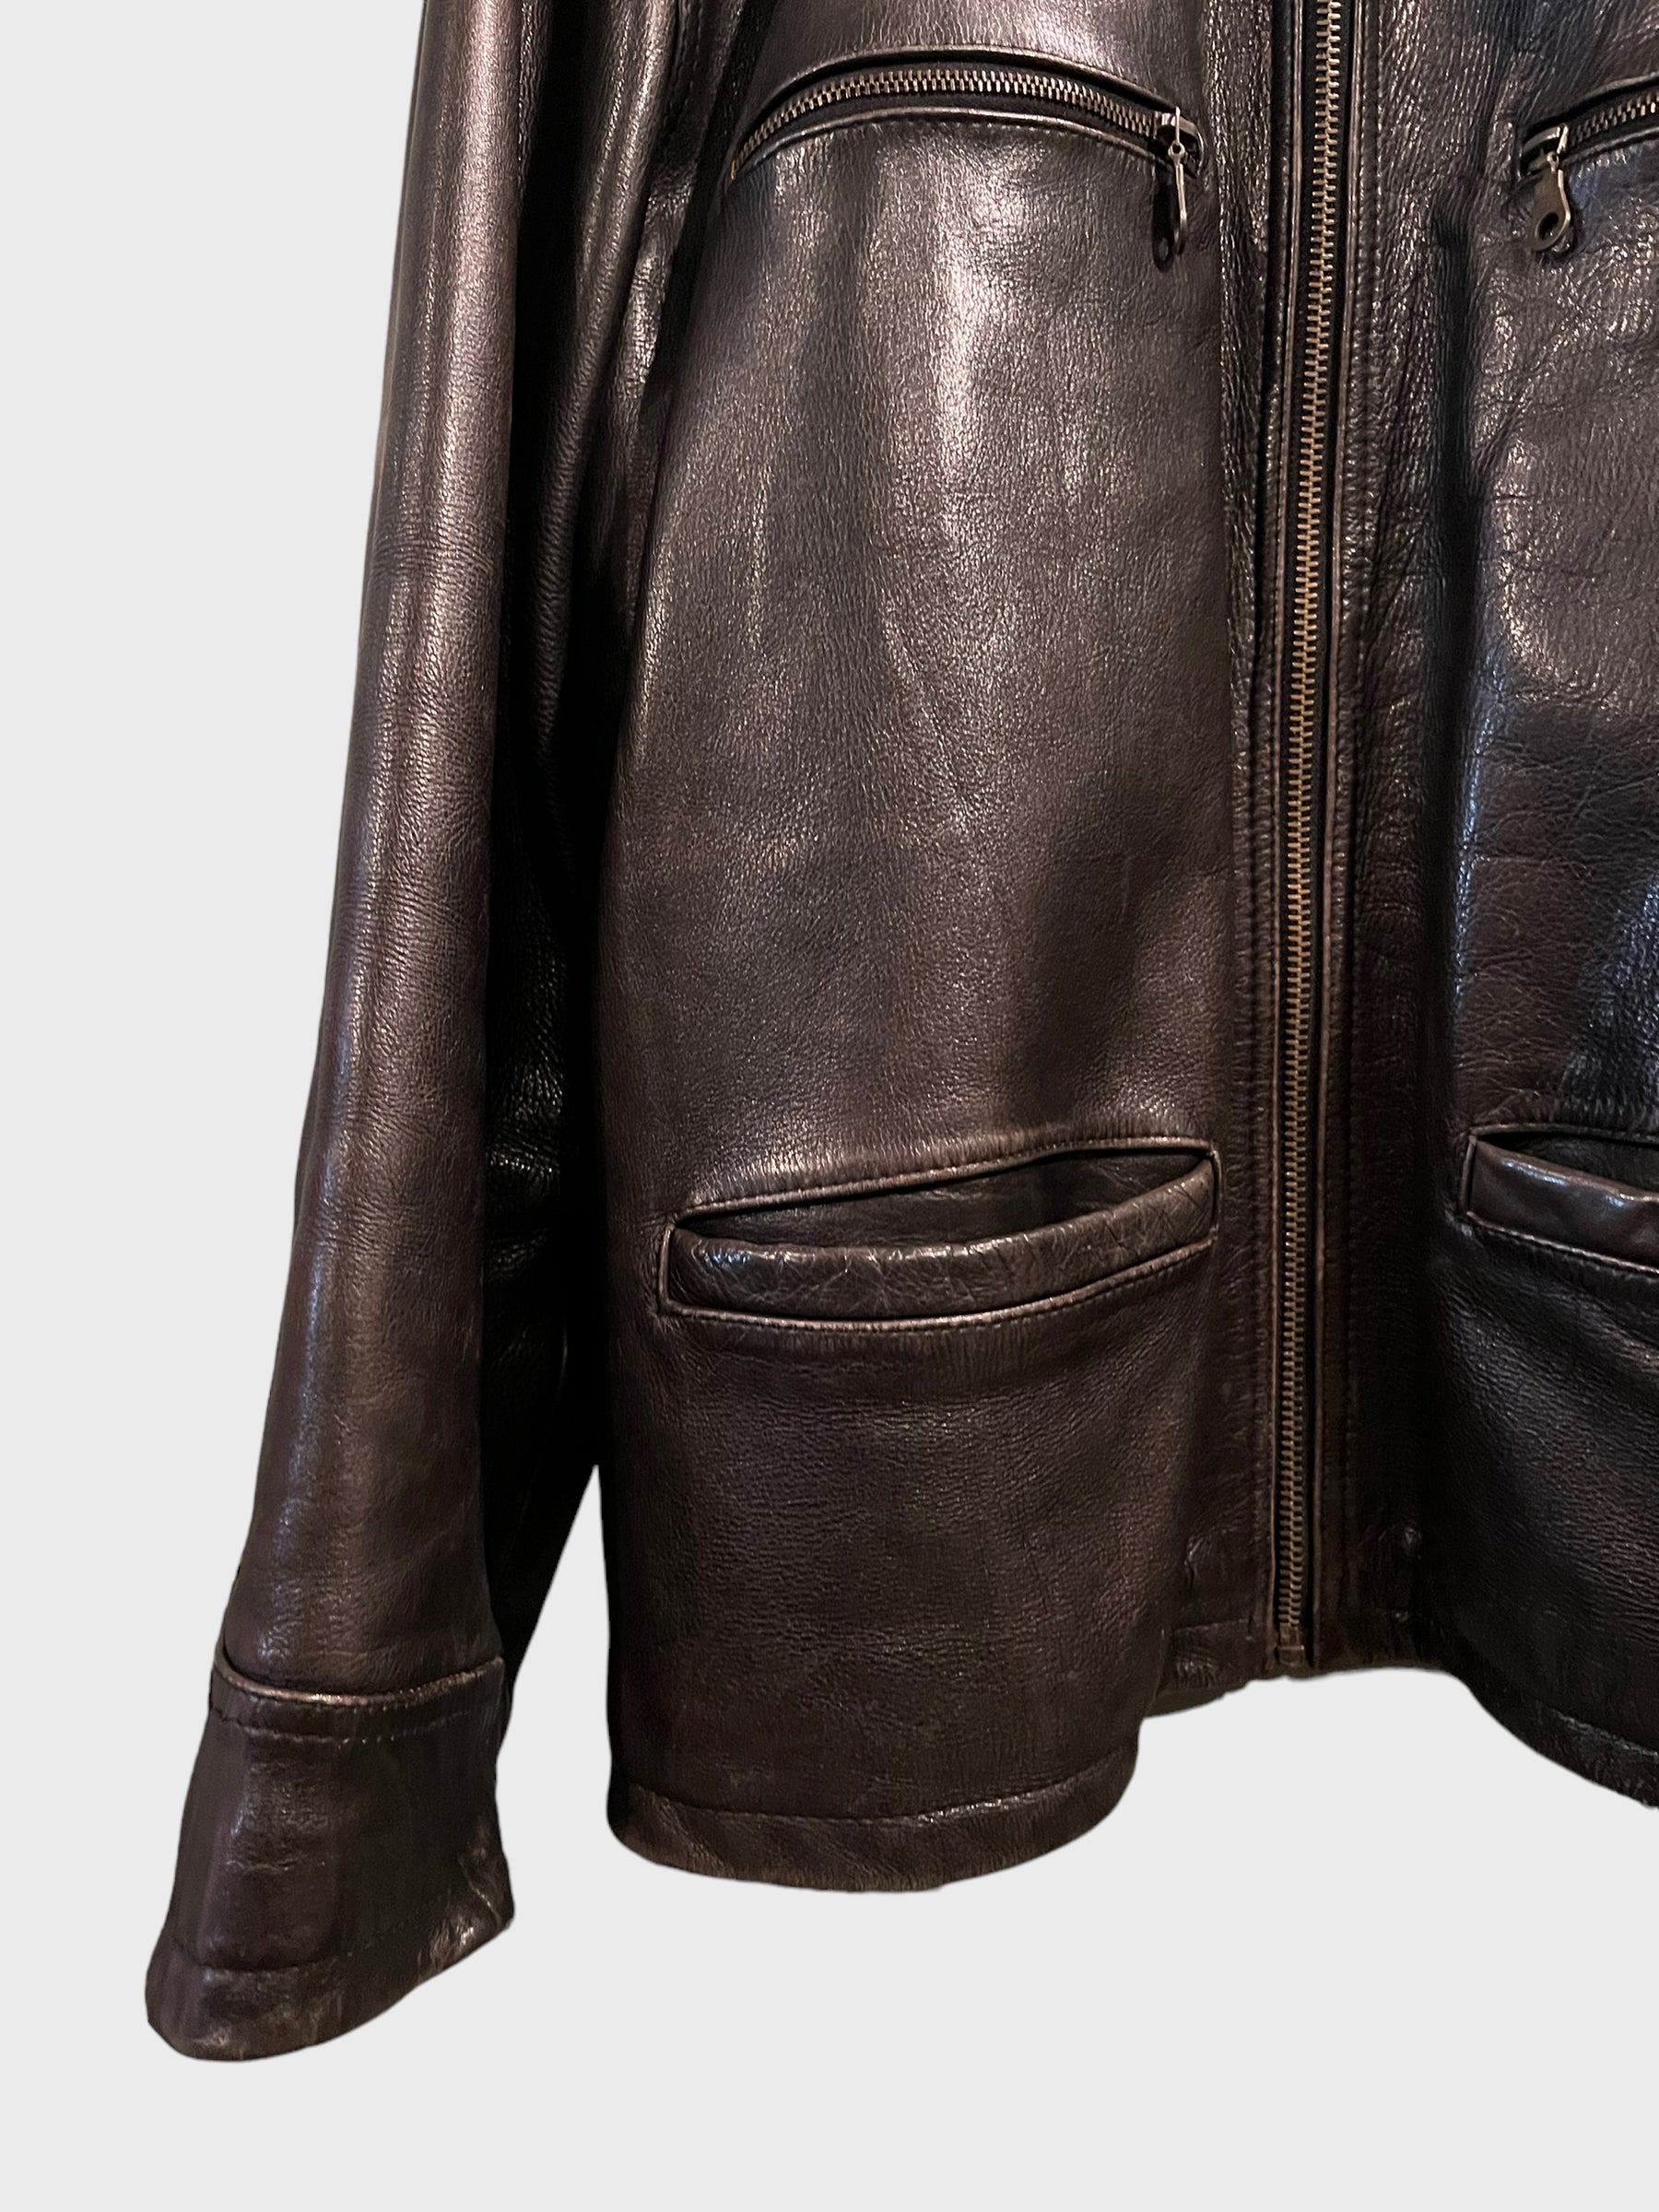 Leather Jacket Chunky Brown